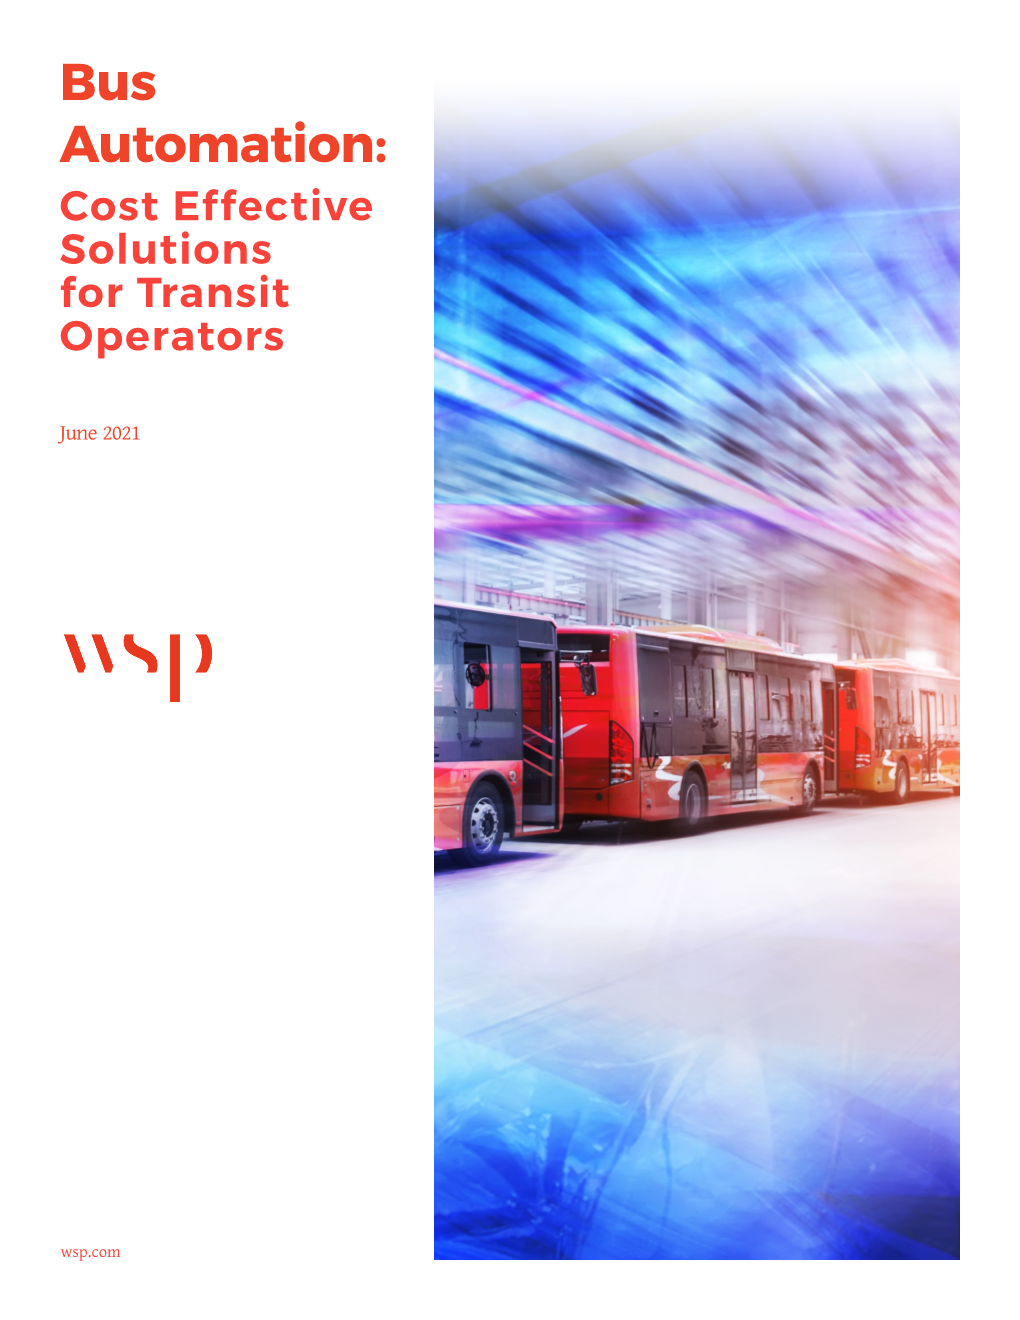 Bus Automation: Cost Effective Solutions for Transit Operators